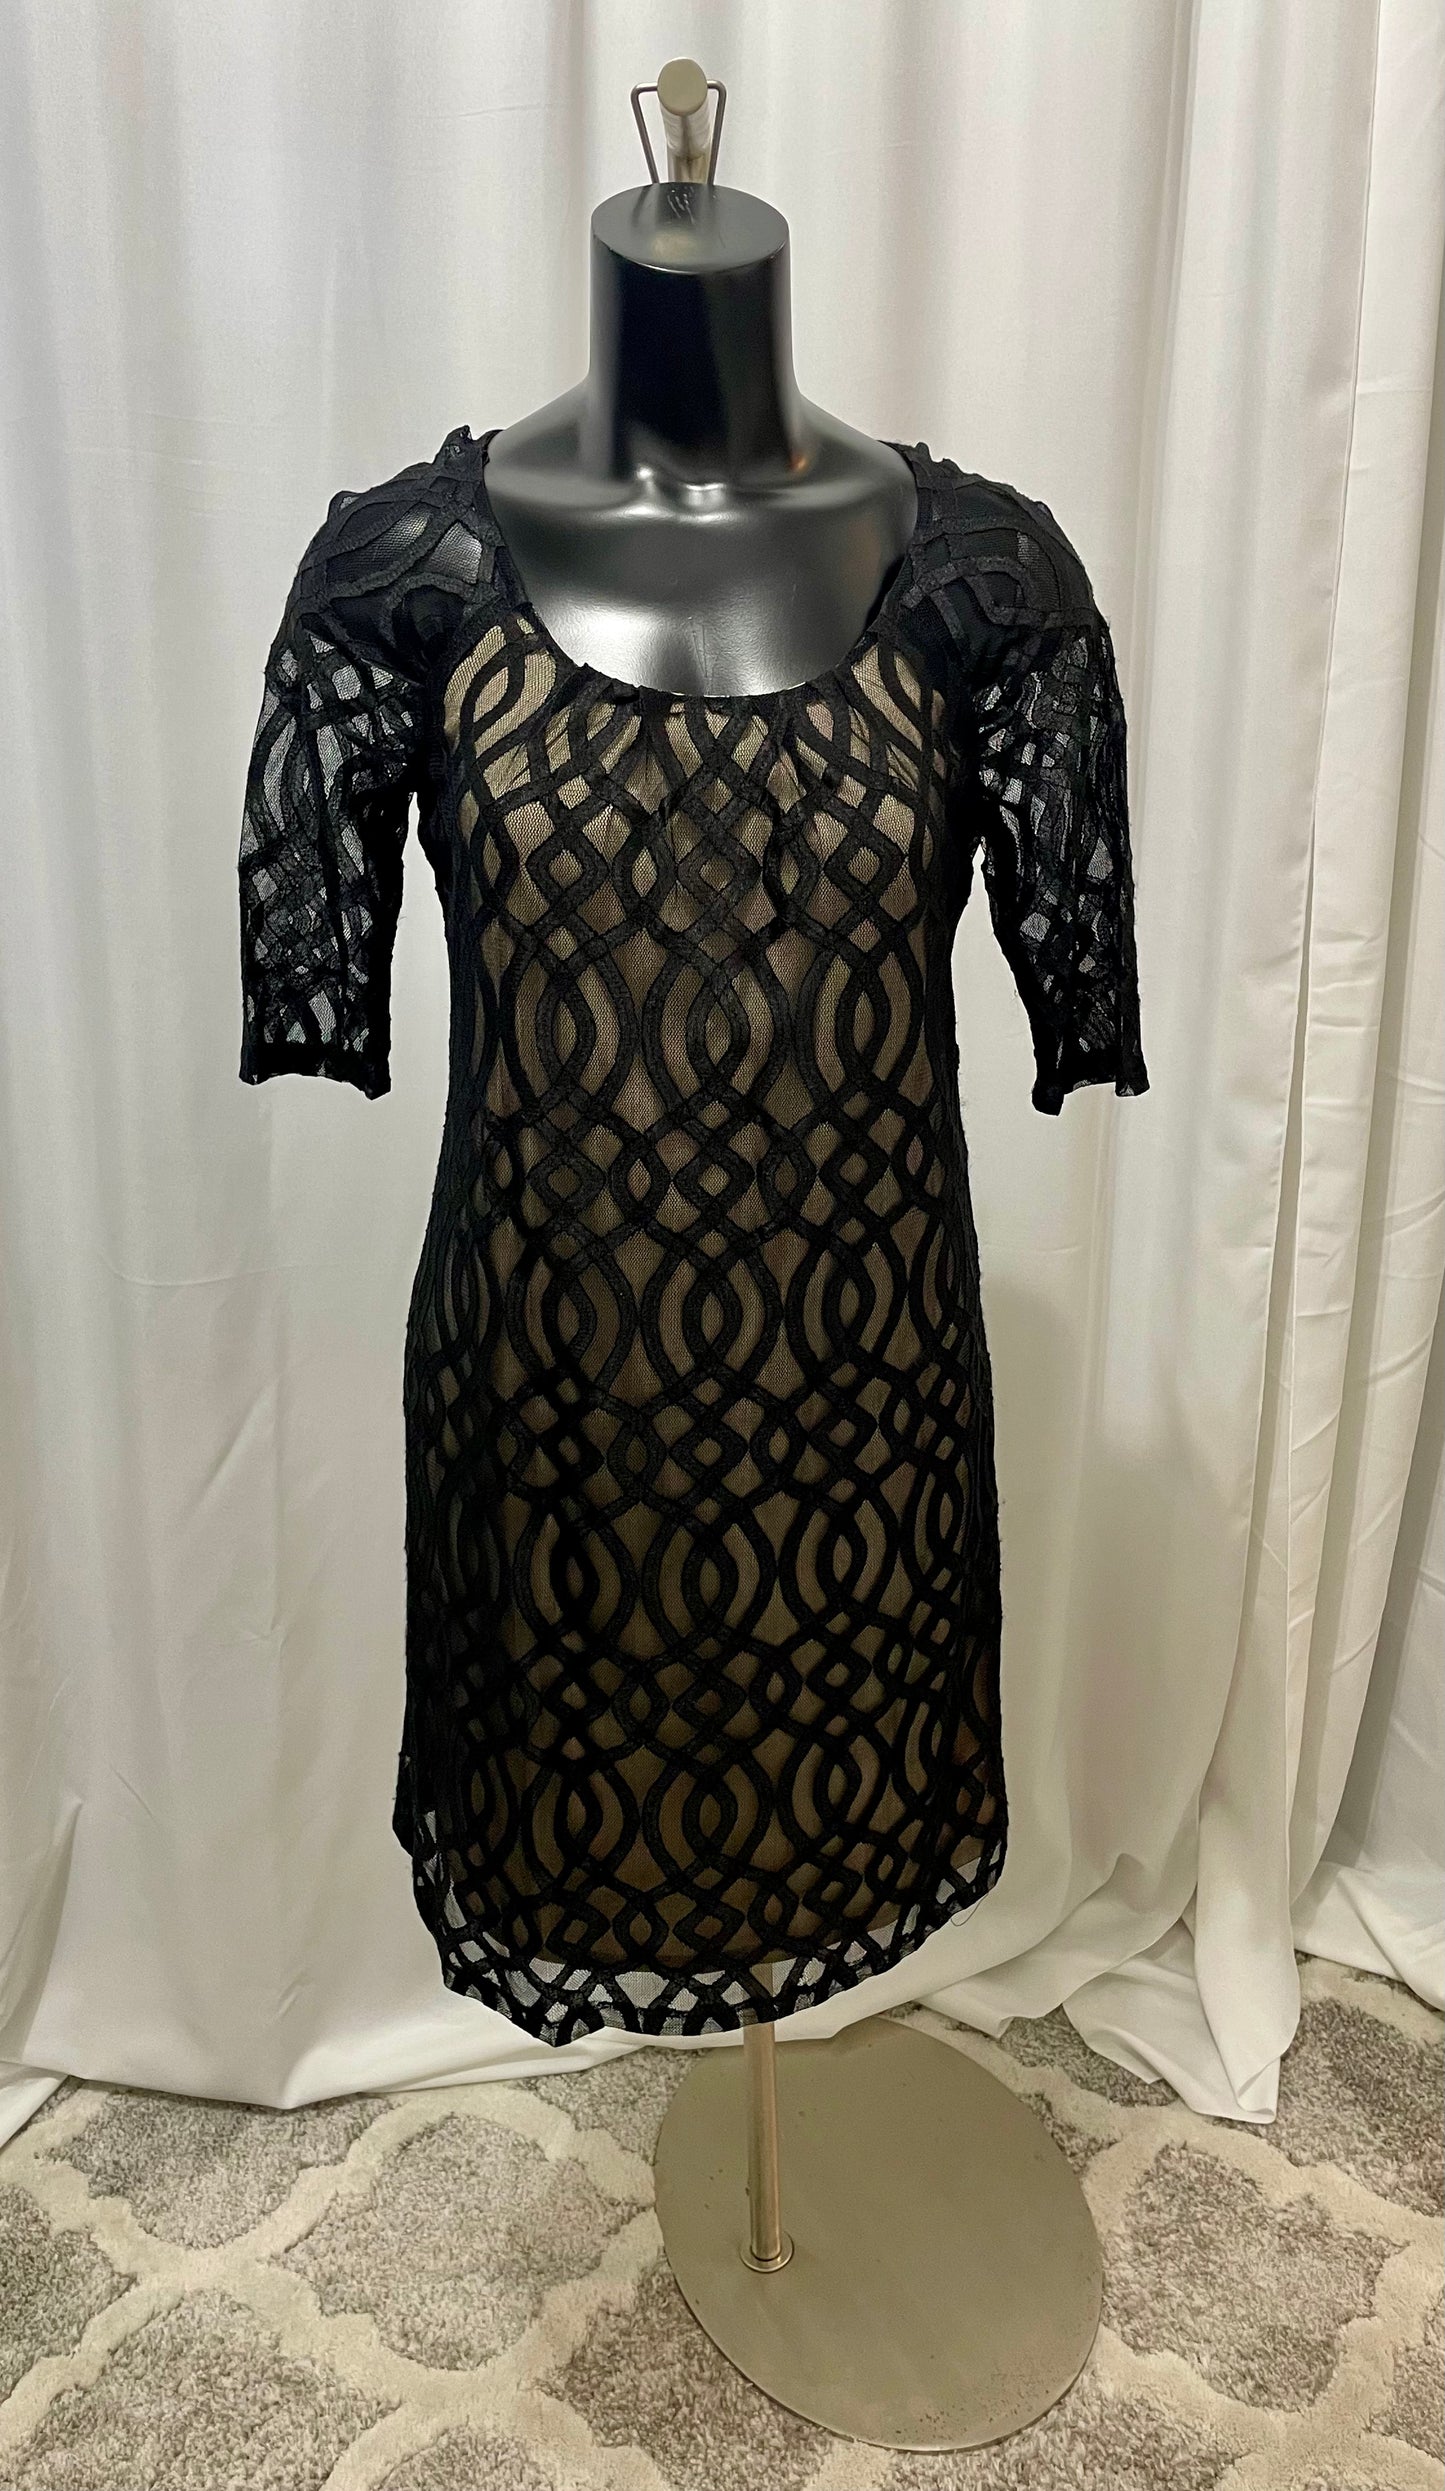 Black Nude Sheer Lace Over Dress